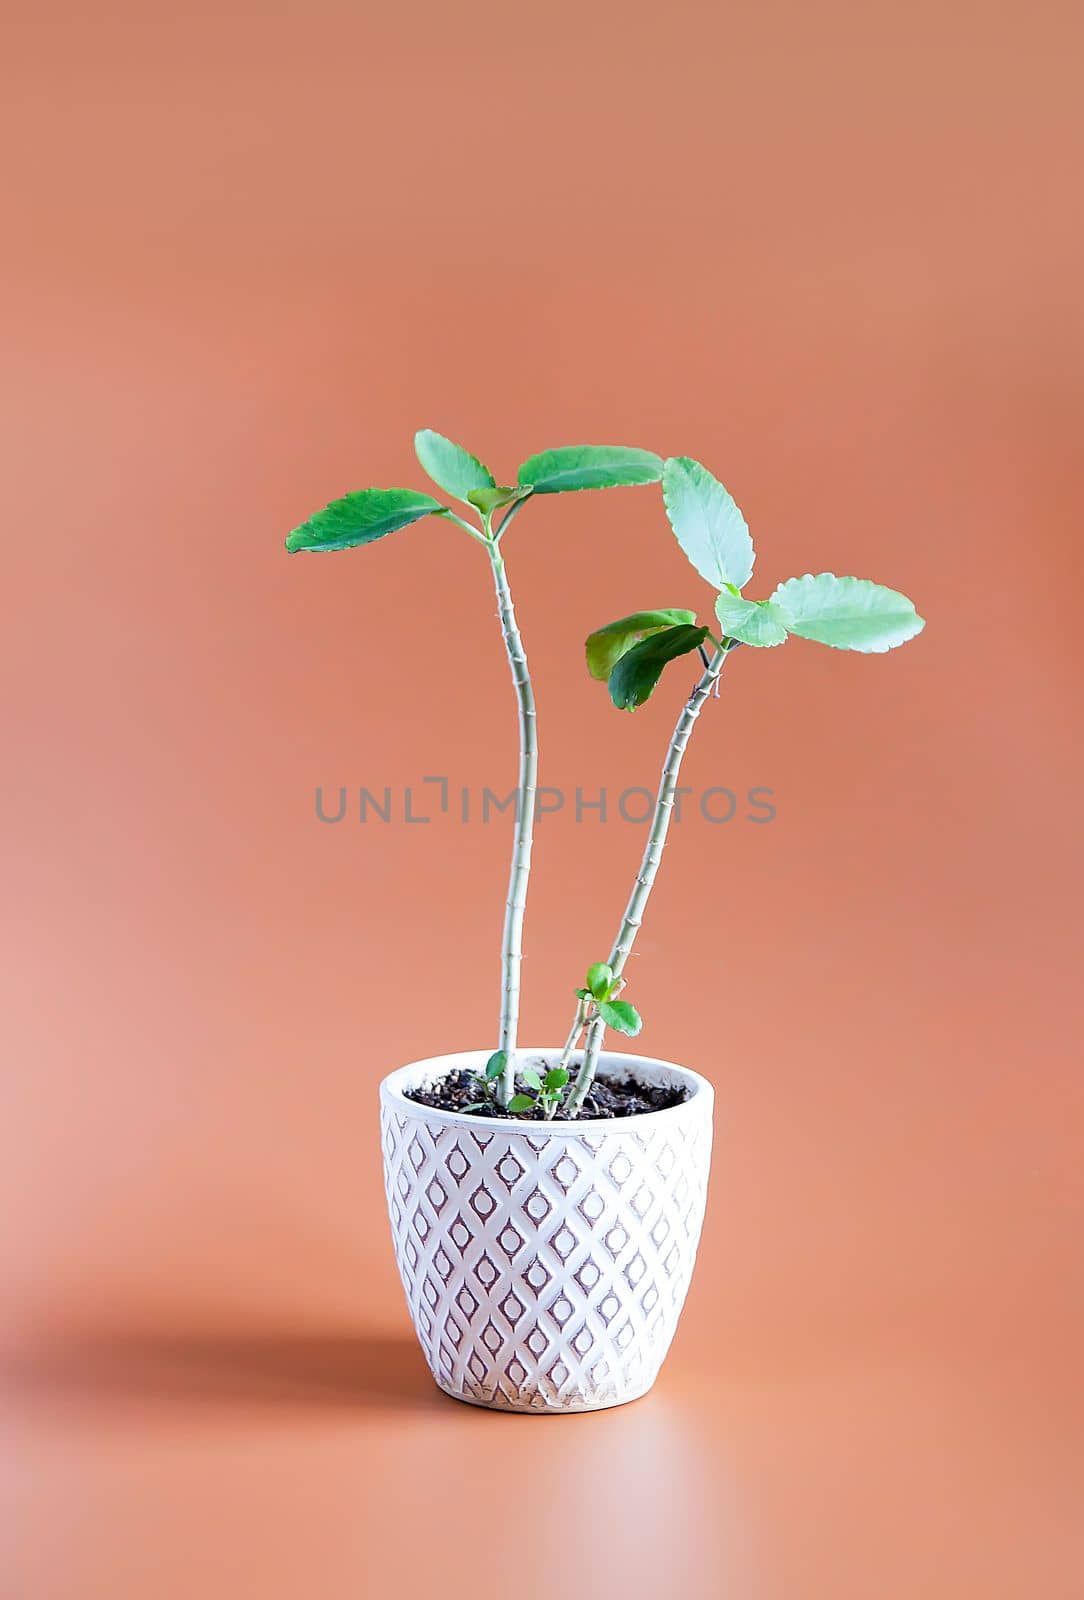 Decorative house plant in a pot